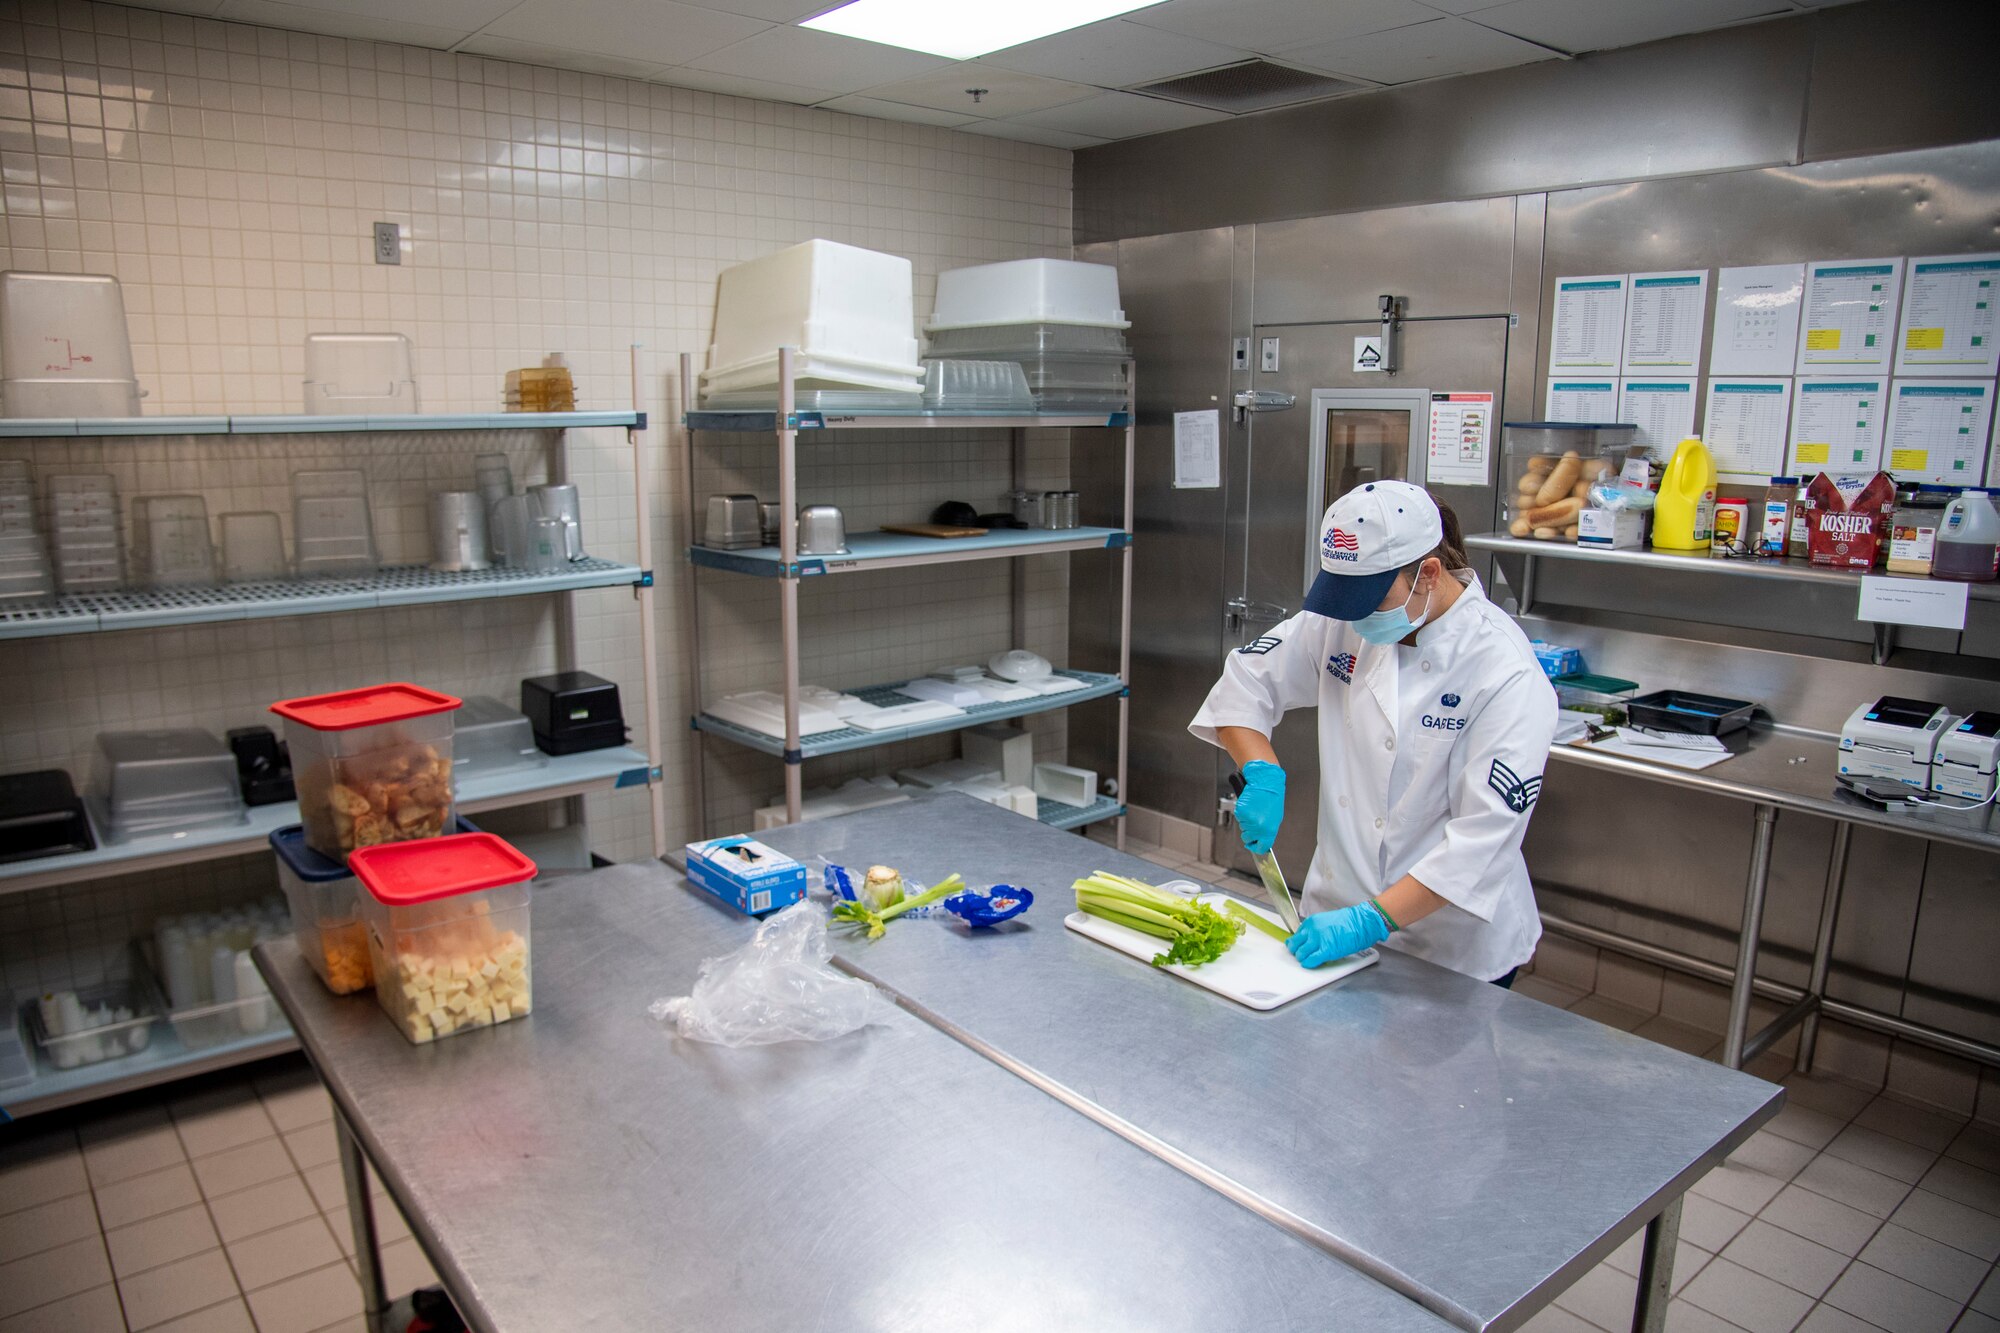 U.S. Air Force Senior Airman Haley Garces, 6th Force Support Squadron food services journeyman, prepares food for service members at MacDill Air Force Base, Florida, June 15, 2021.